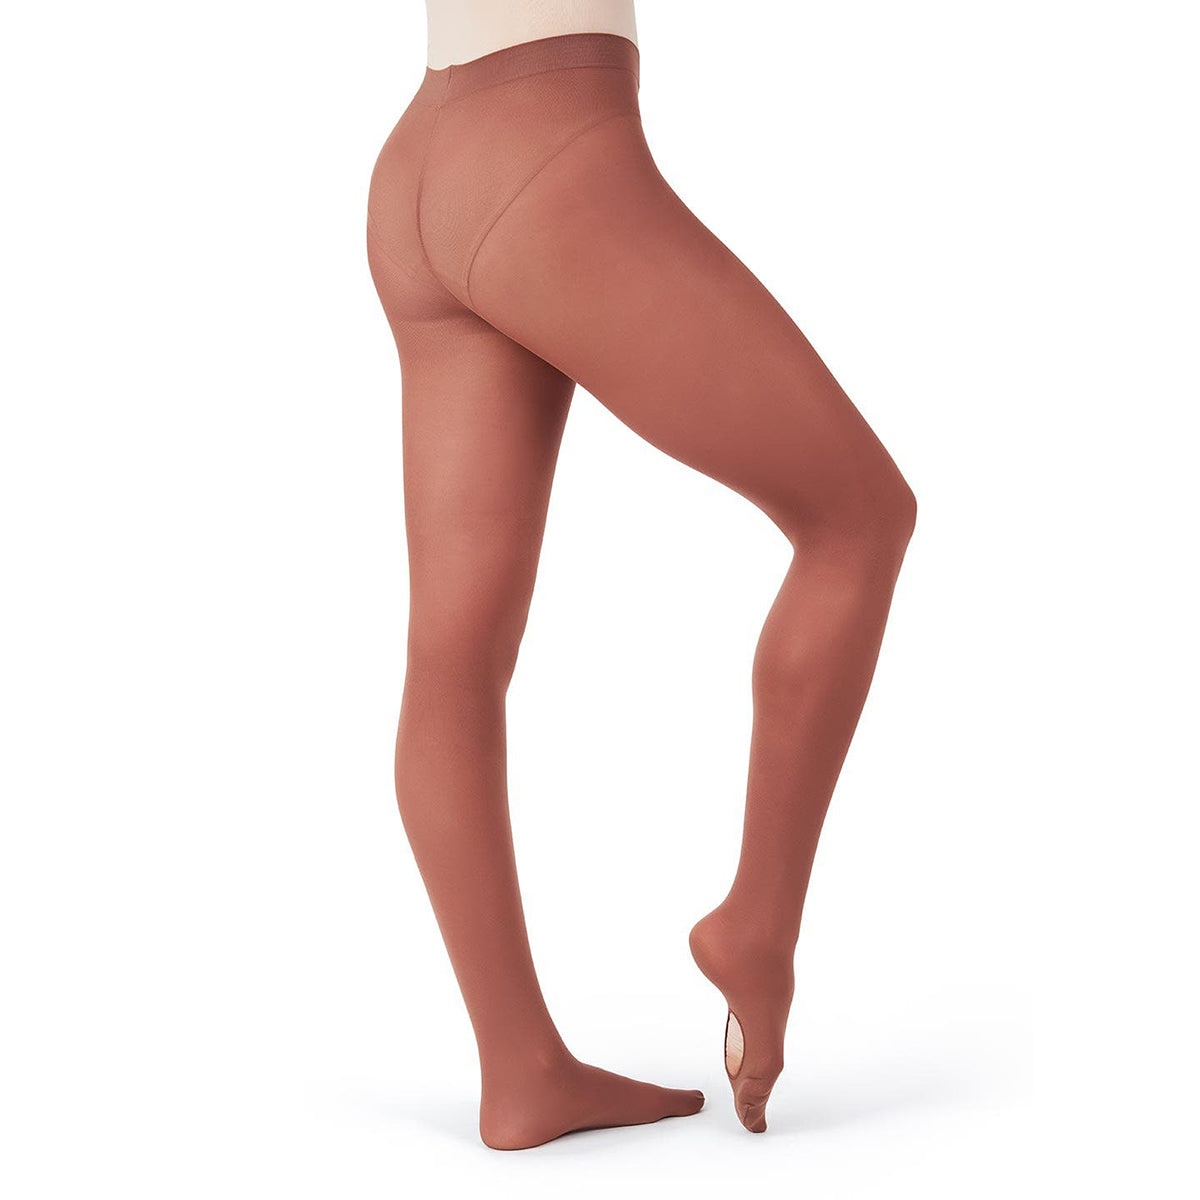 ADULT CAPEZIO FOOTLESS TIGHTS WITH SELF KNIT WAISTBAND - 1917